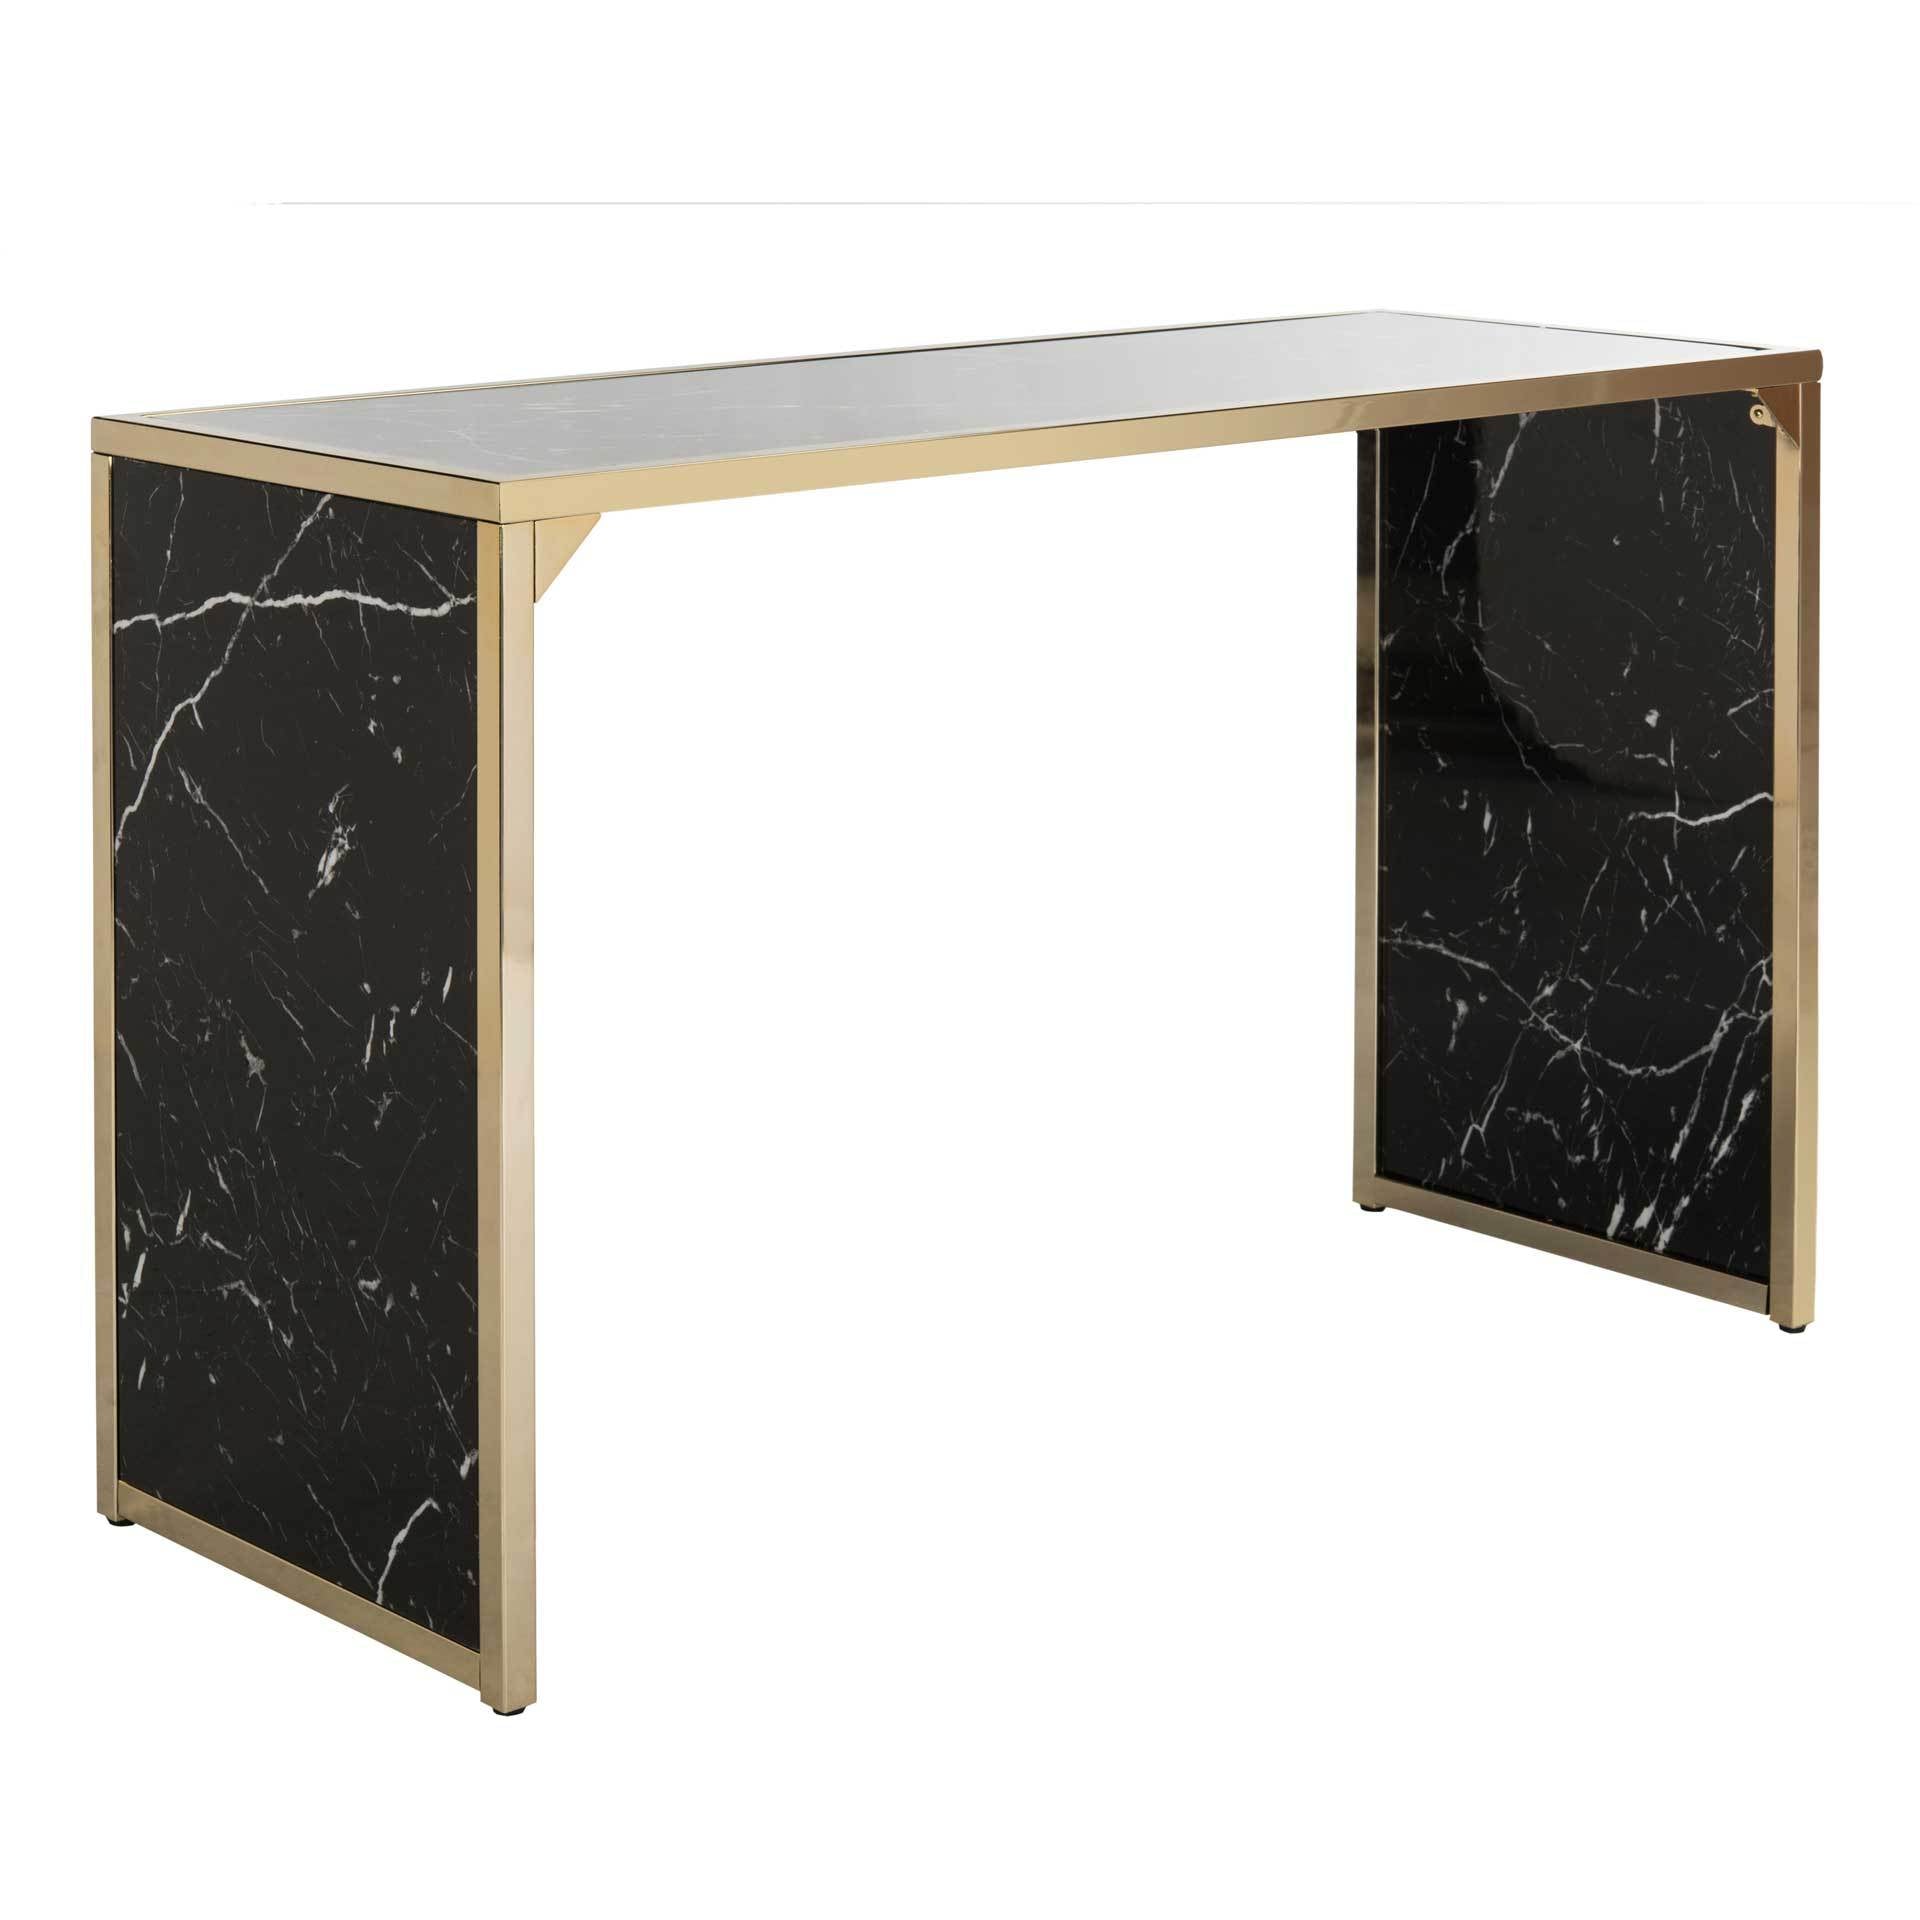 Kyan Console Table